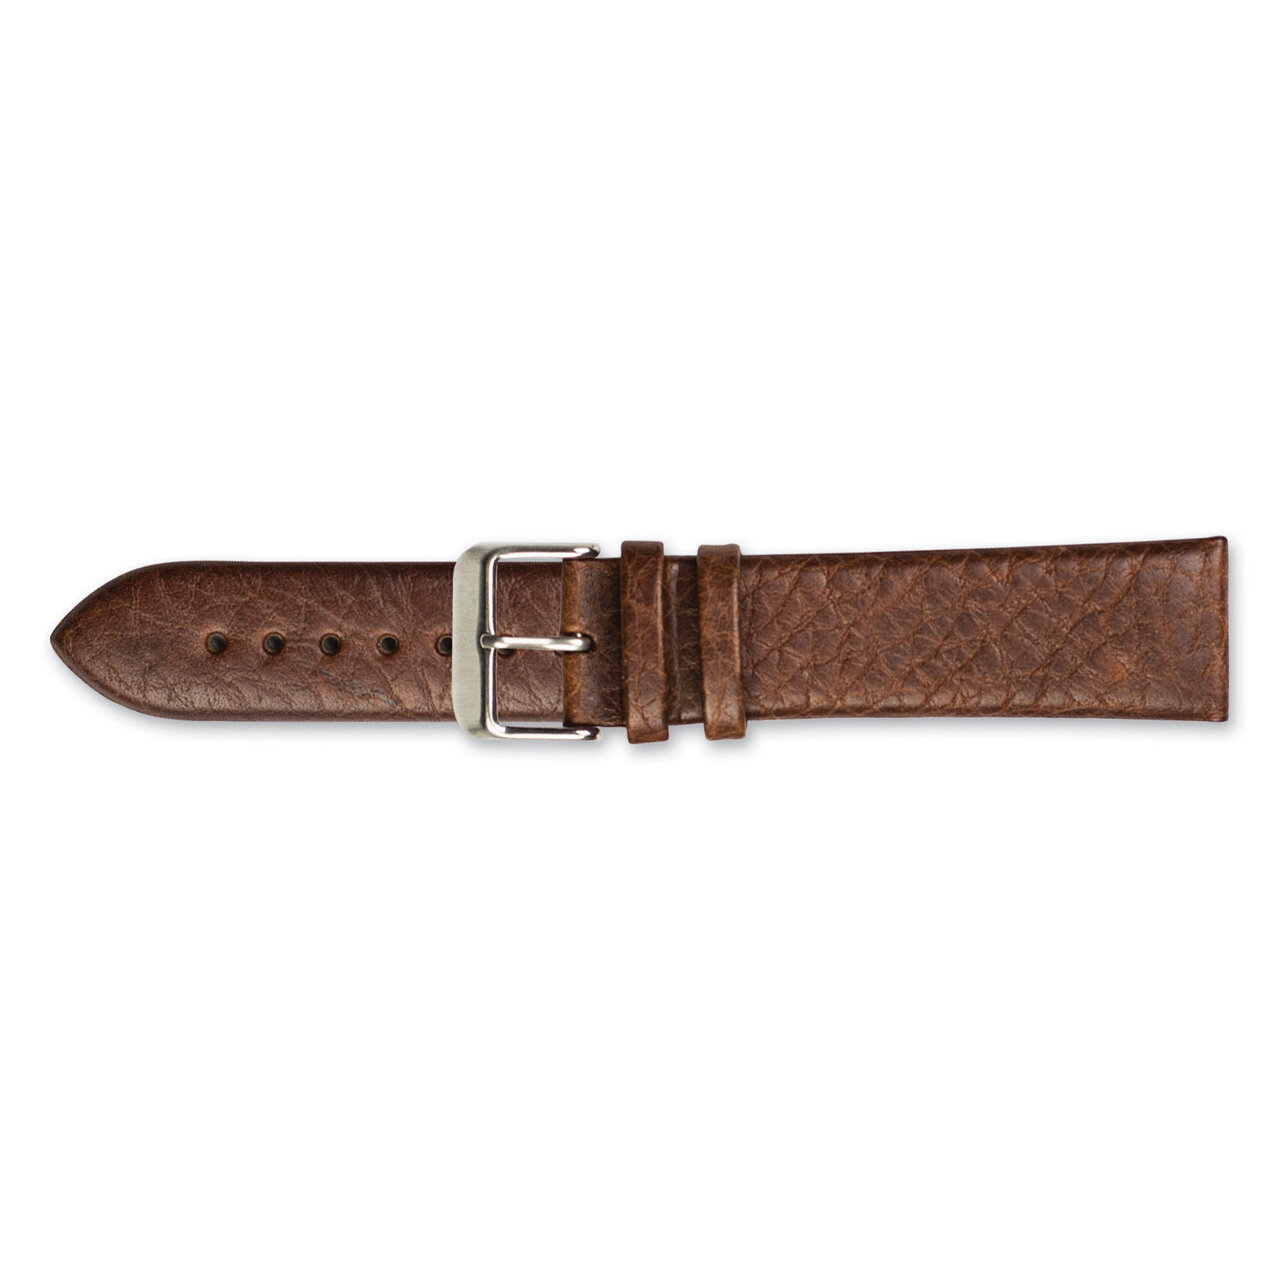 18mm Brown Distrssed Leather Watch Band 7.75 Inch Silver-tone Buckle BAW320-18